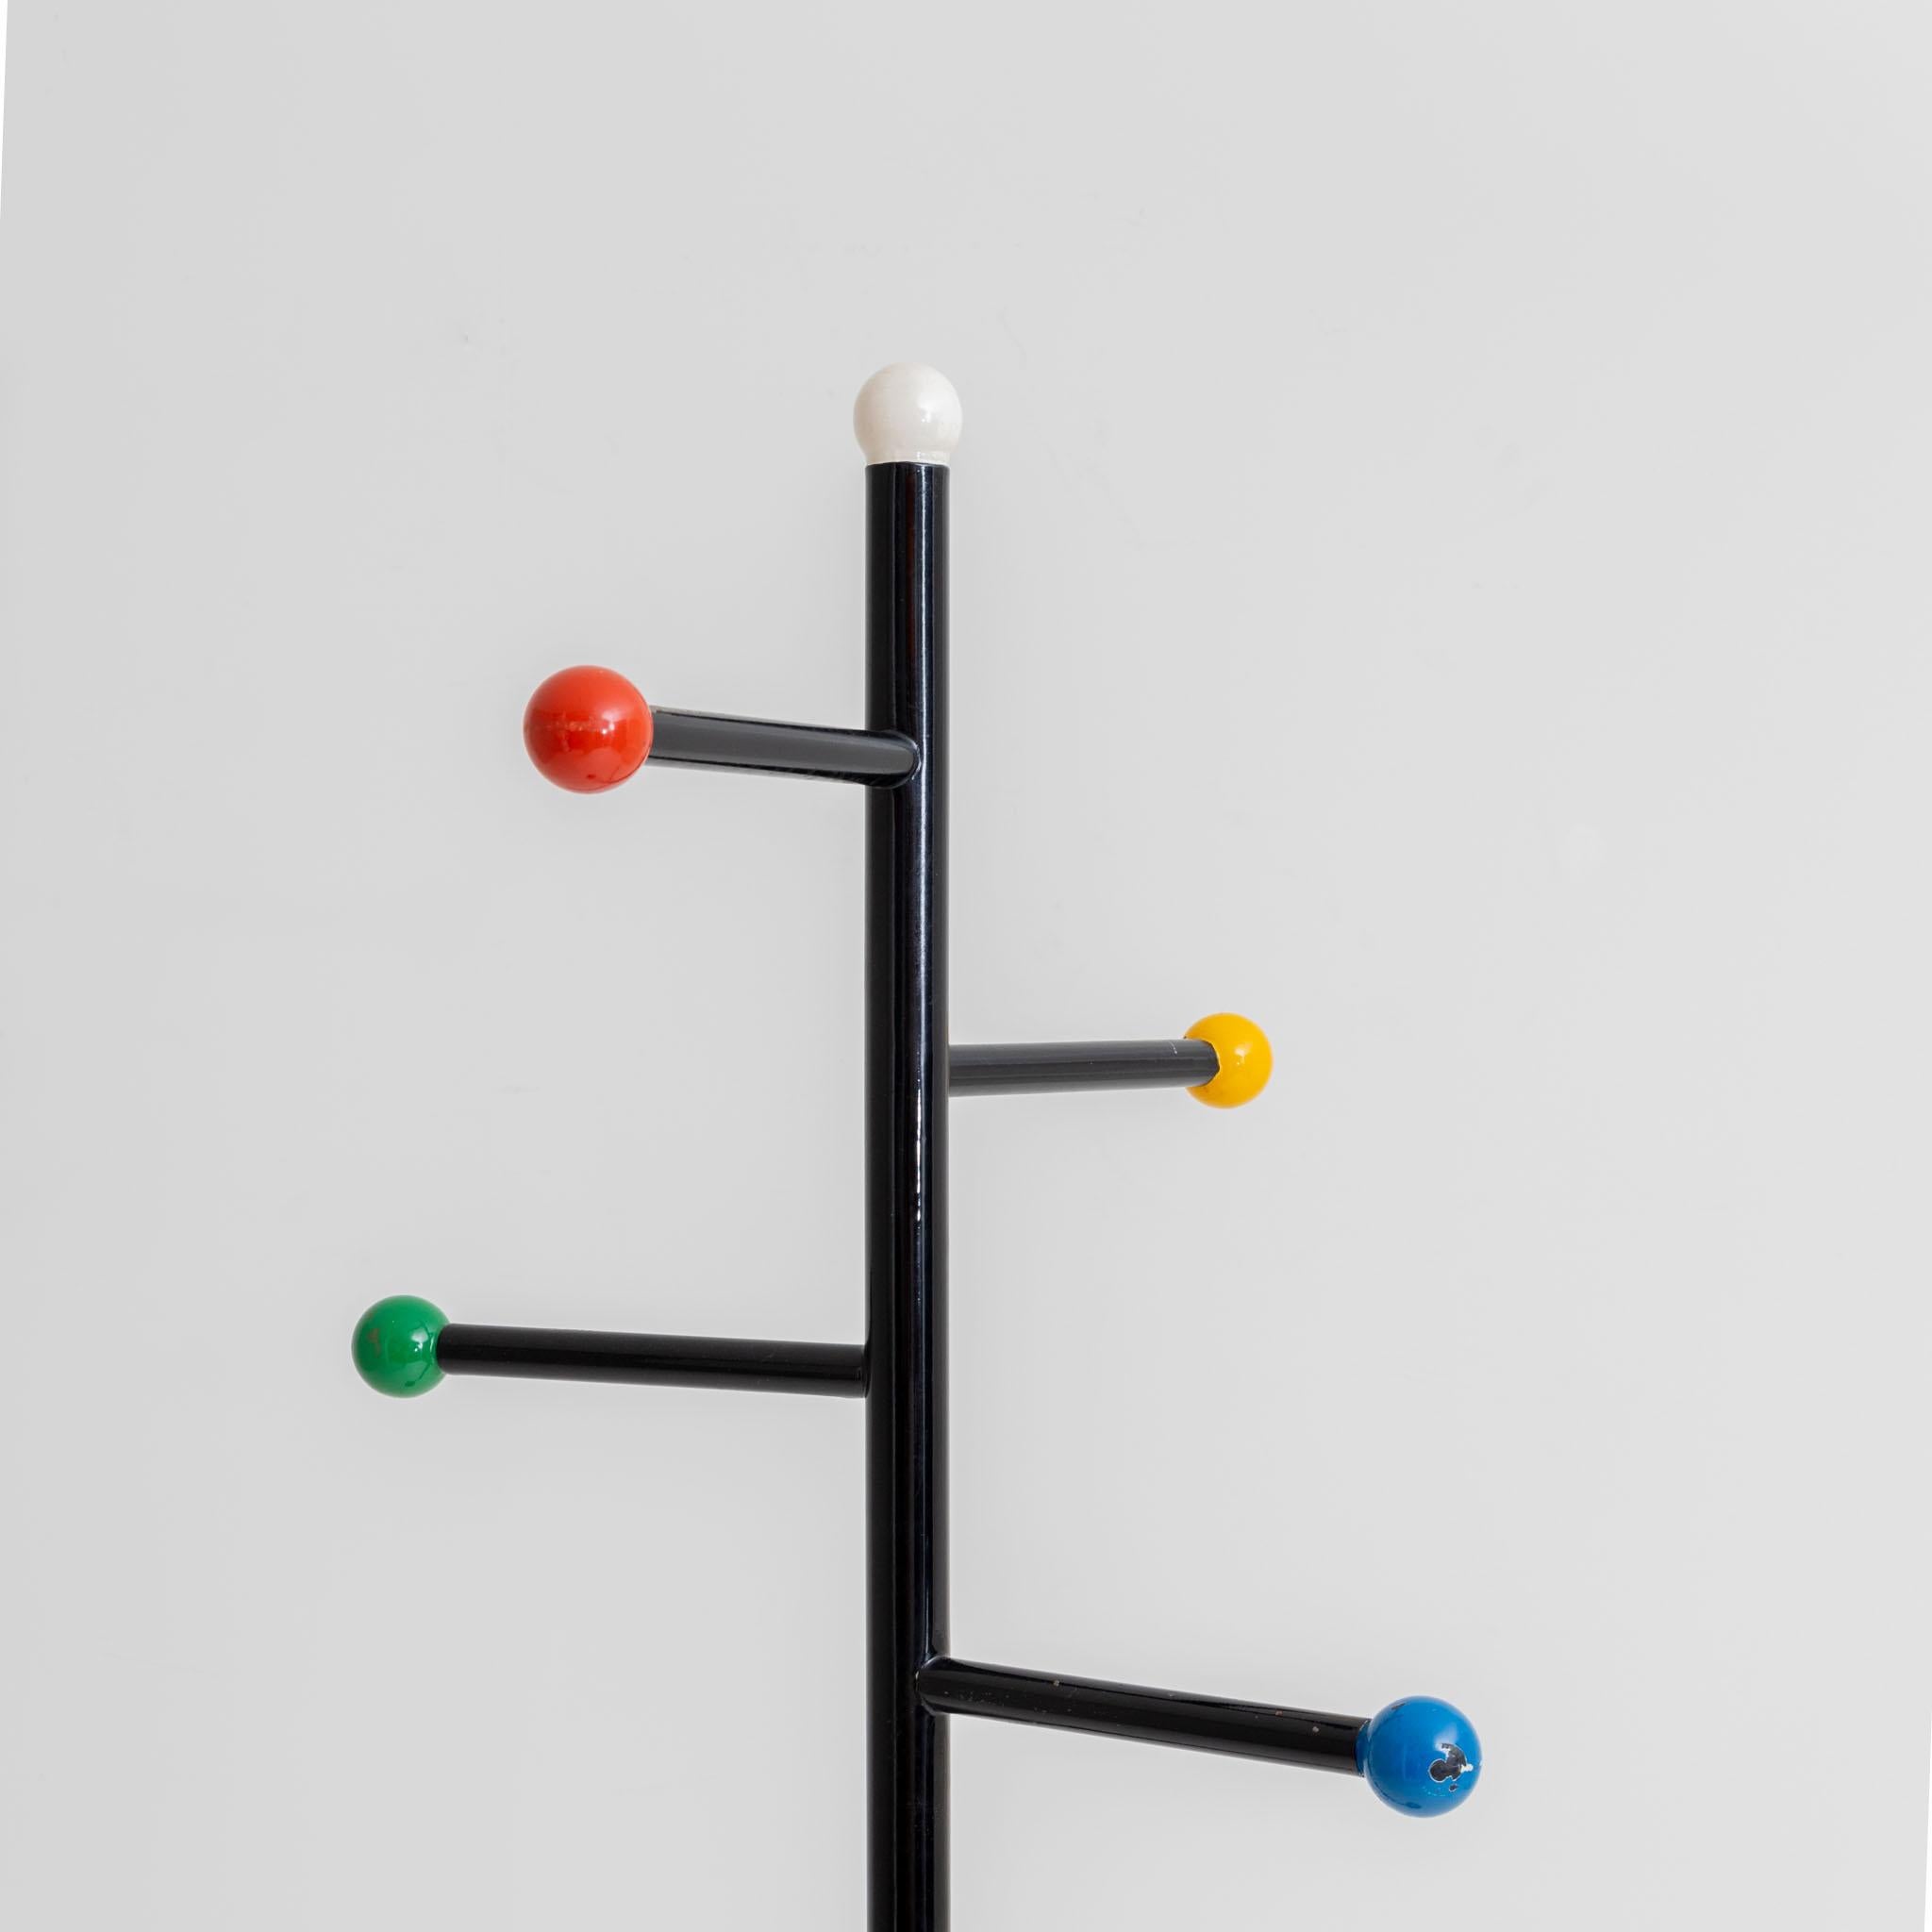 Metal coat rack with black base and colorful balls at the end of the clothes rails. Color worn off in places.